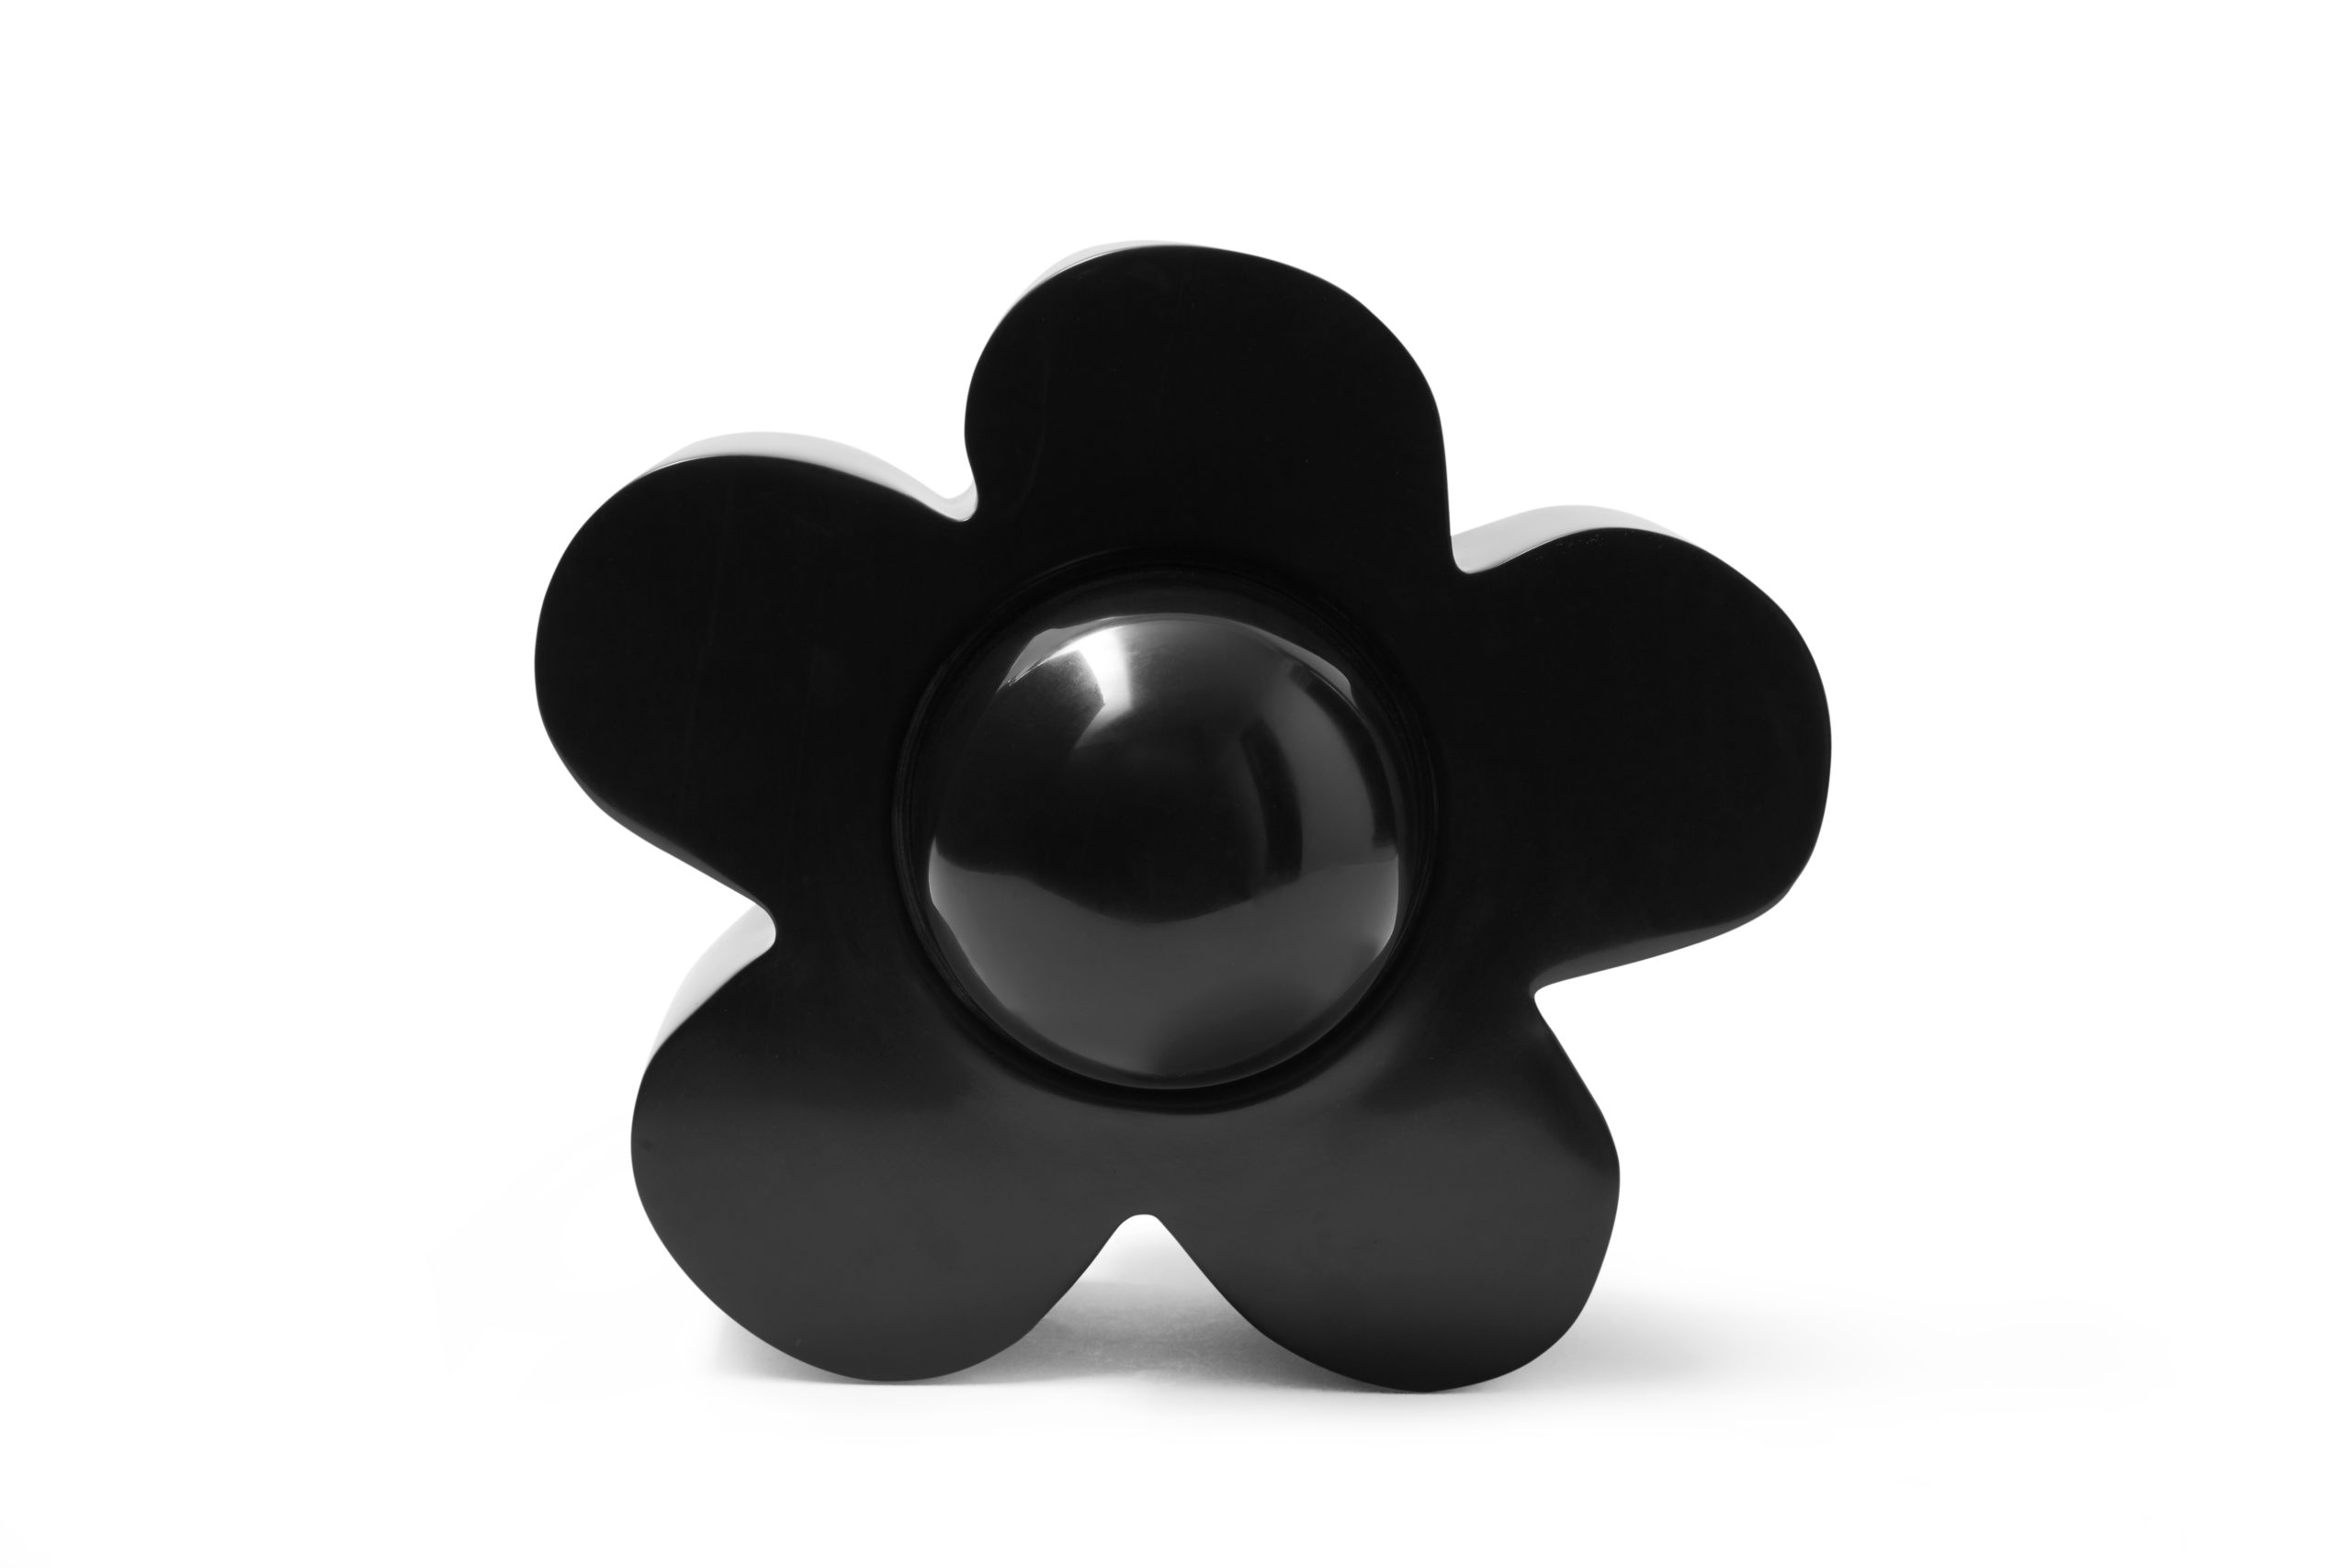 Claire Lieberman: "Flower (A.W.), 2020. Hand-carved and polished black marble, 9.5" x 8" x 8".